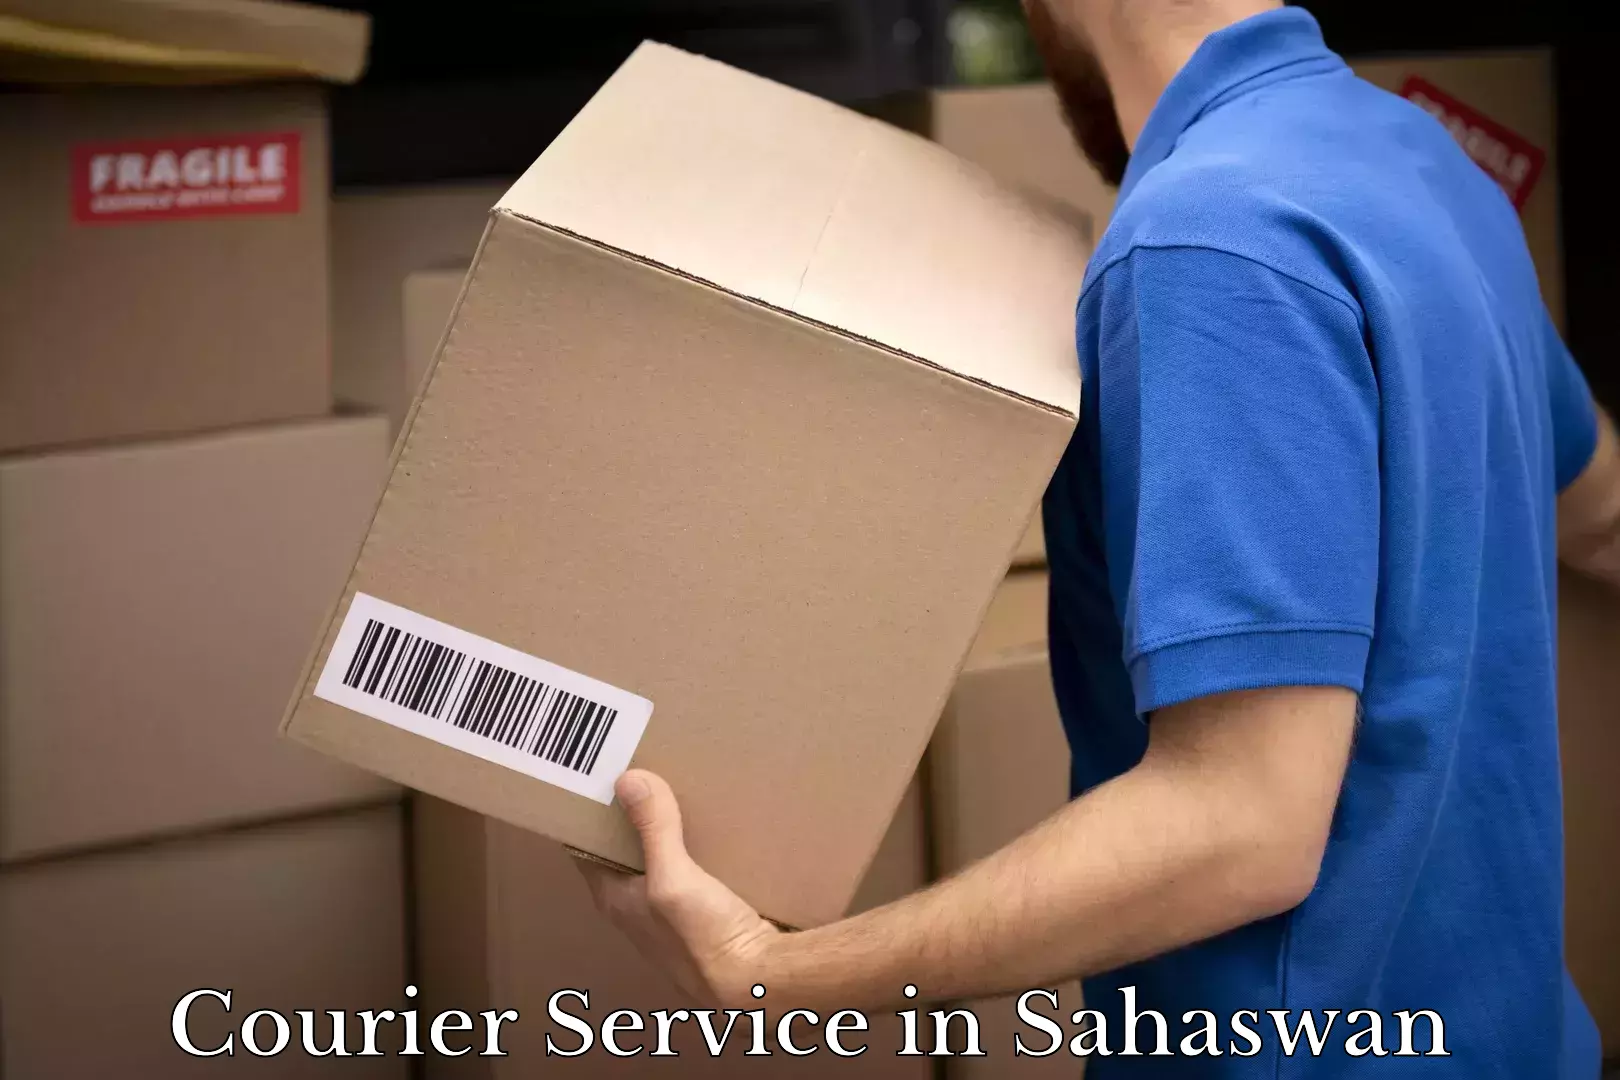 Tailored shipping services in Sahaswan